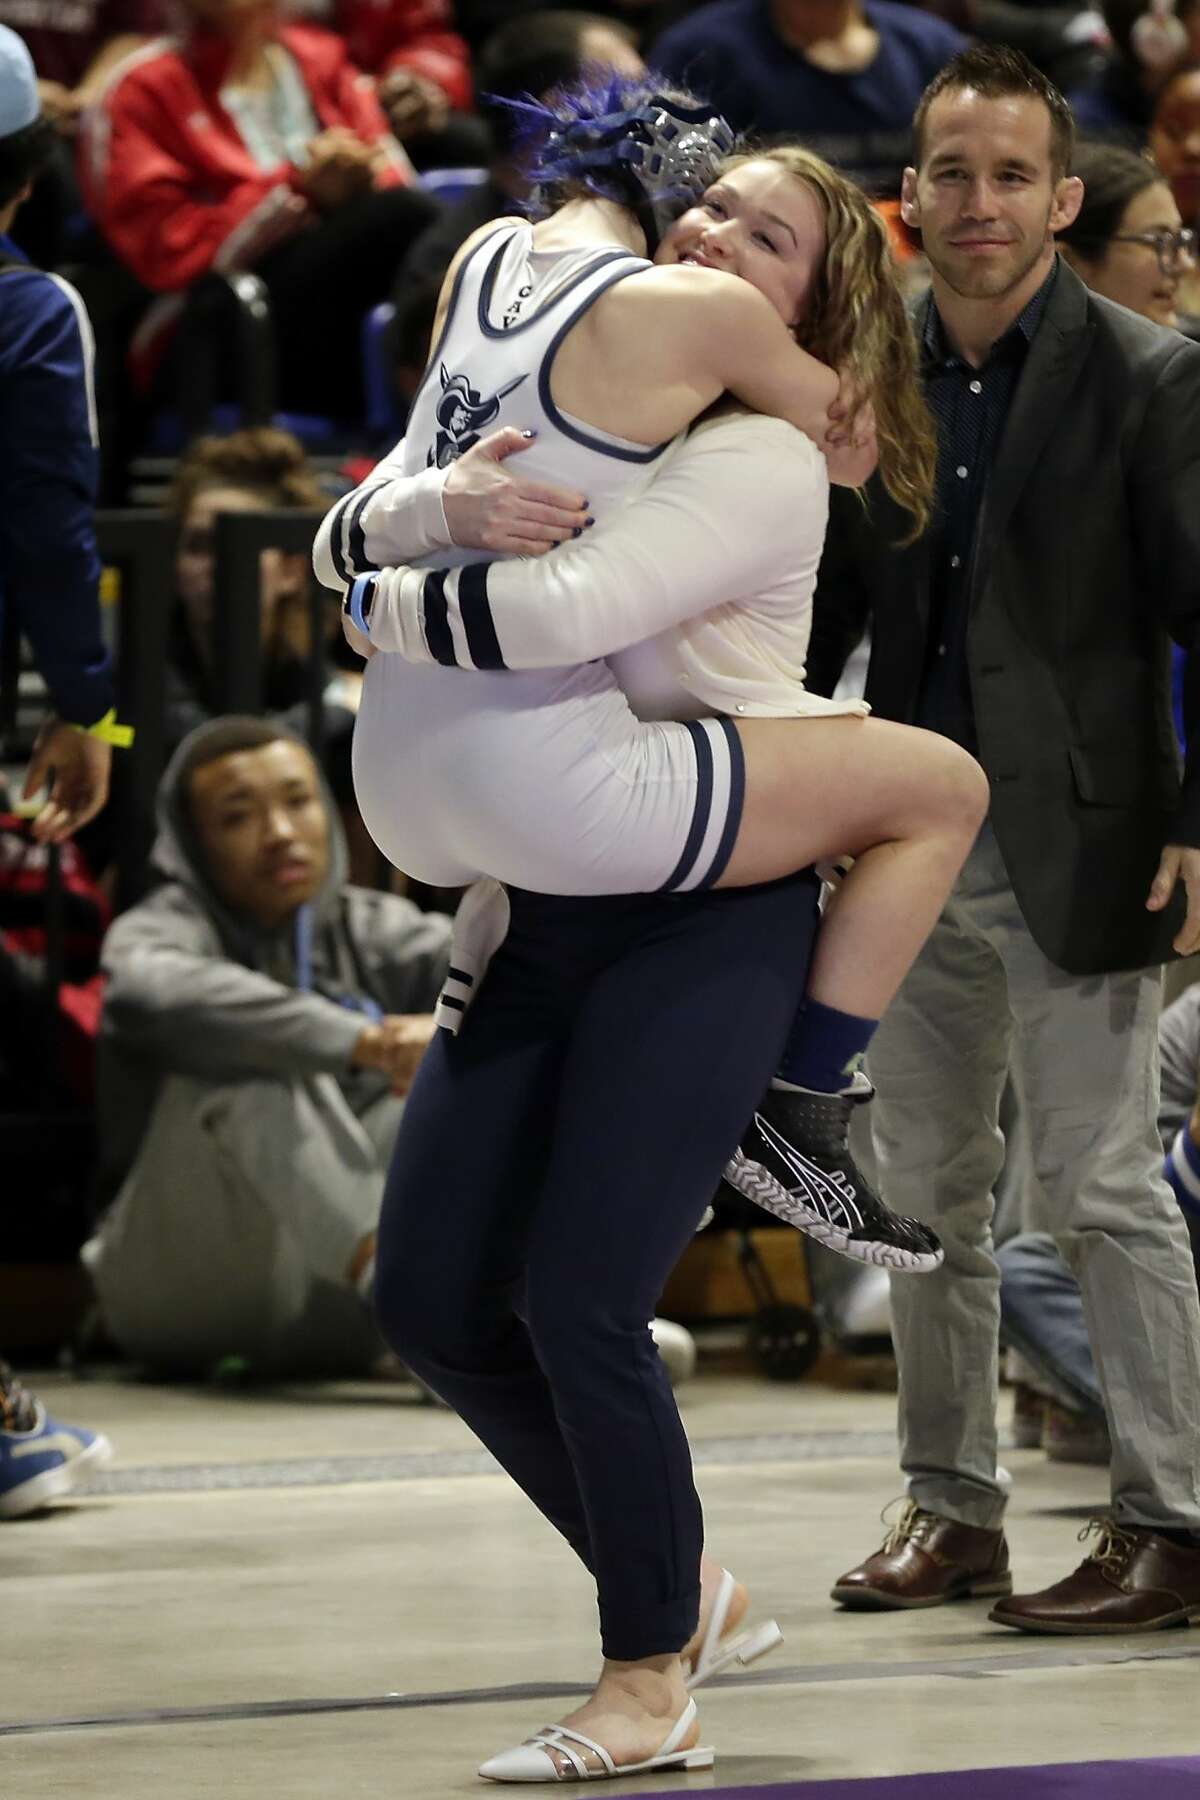 College Parks Olivia Degeorgio jumps into her coaches arms after defeating Tascosa's Mia Diaz in their Class 6A-95lbs championship match of the state high school wrestling championships Saturday, Feb. 22, 2020 at the Berry Center in Cypress, TX.